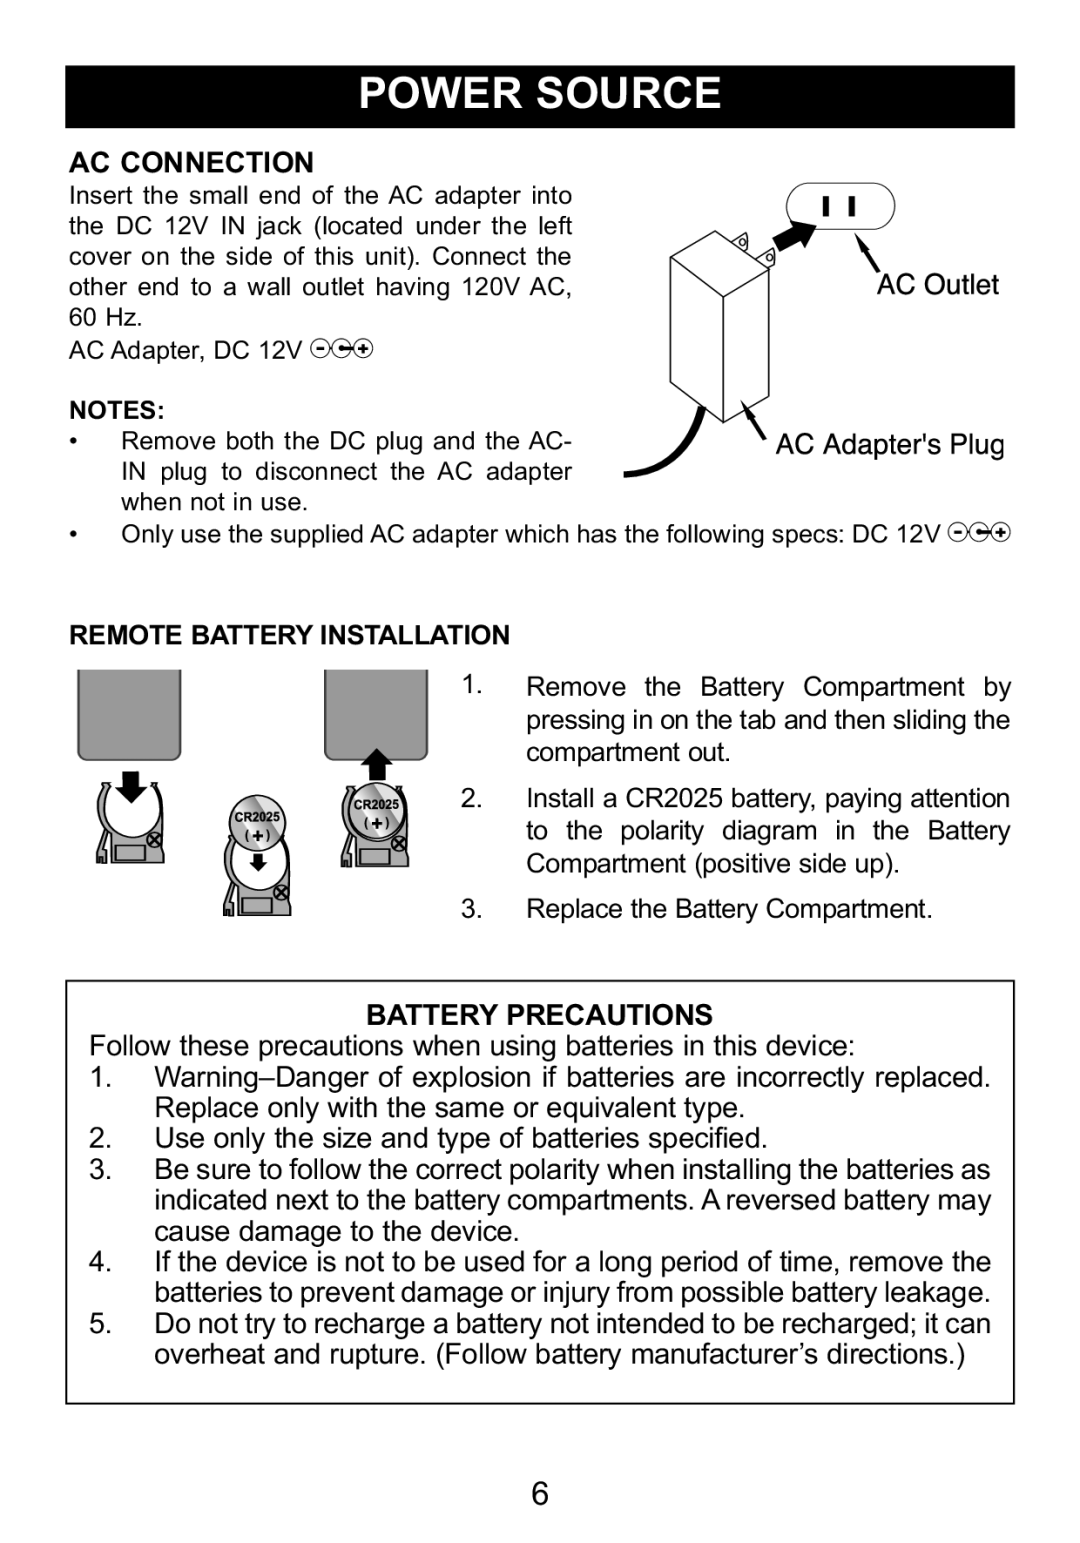 Memorex MDF8402-DWD manual Ac Connection, Battery Precautions, Follow these precautions when using batteries in this device 